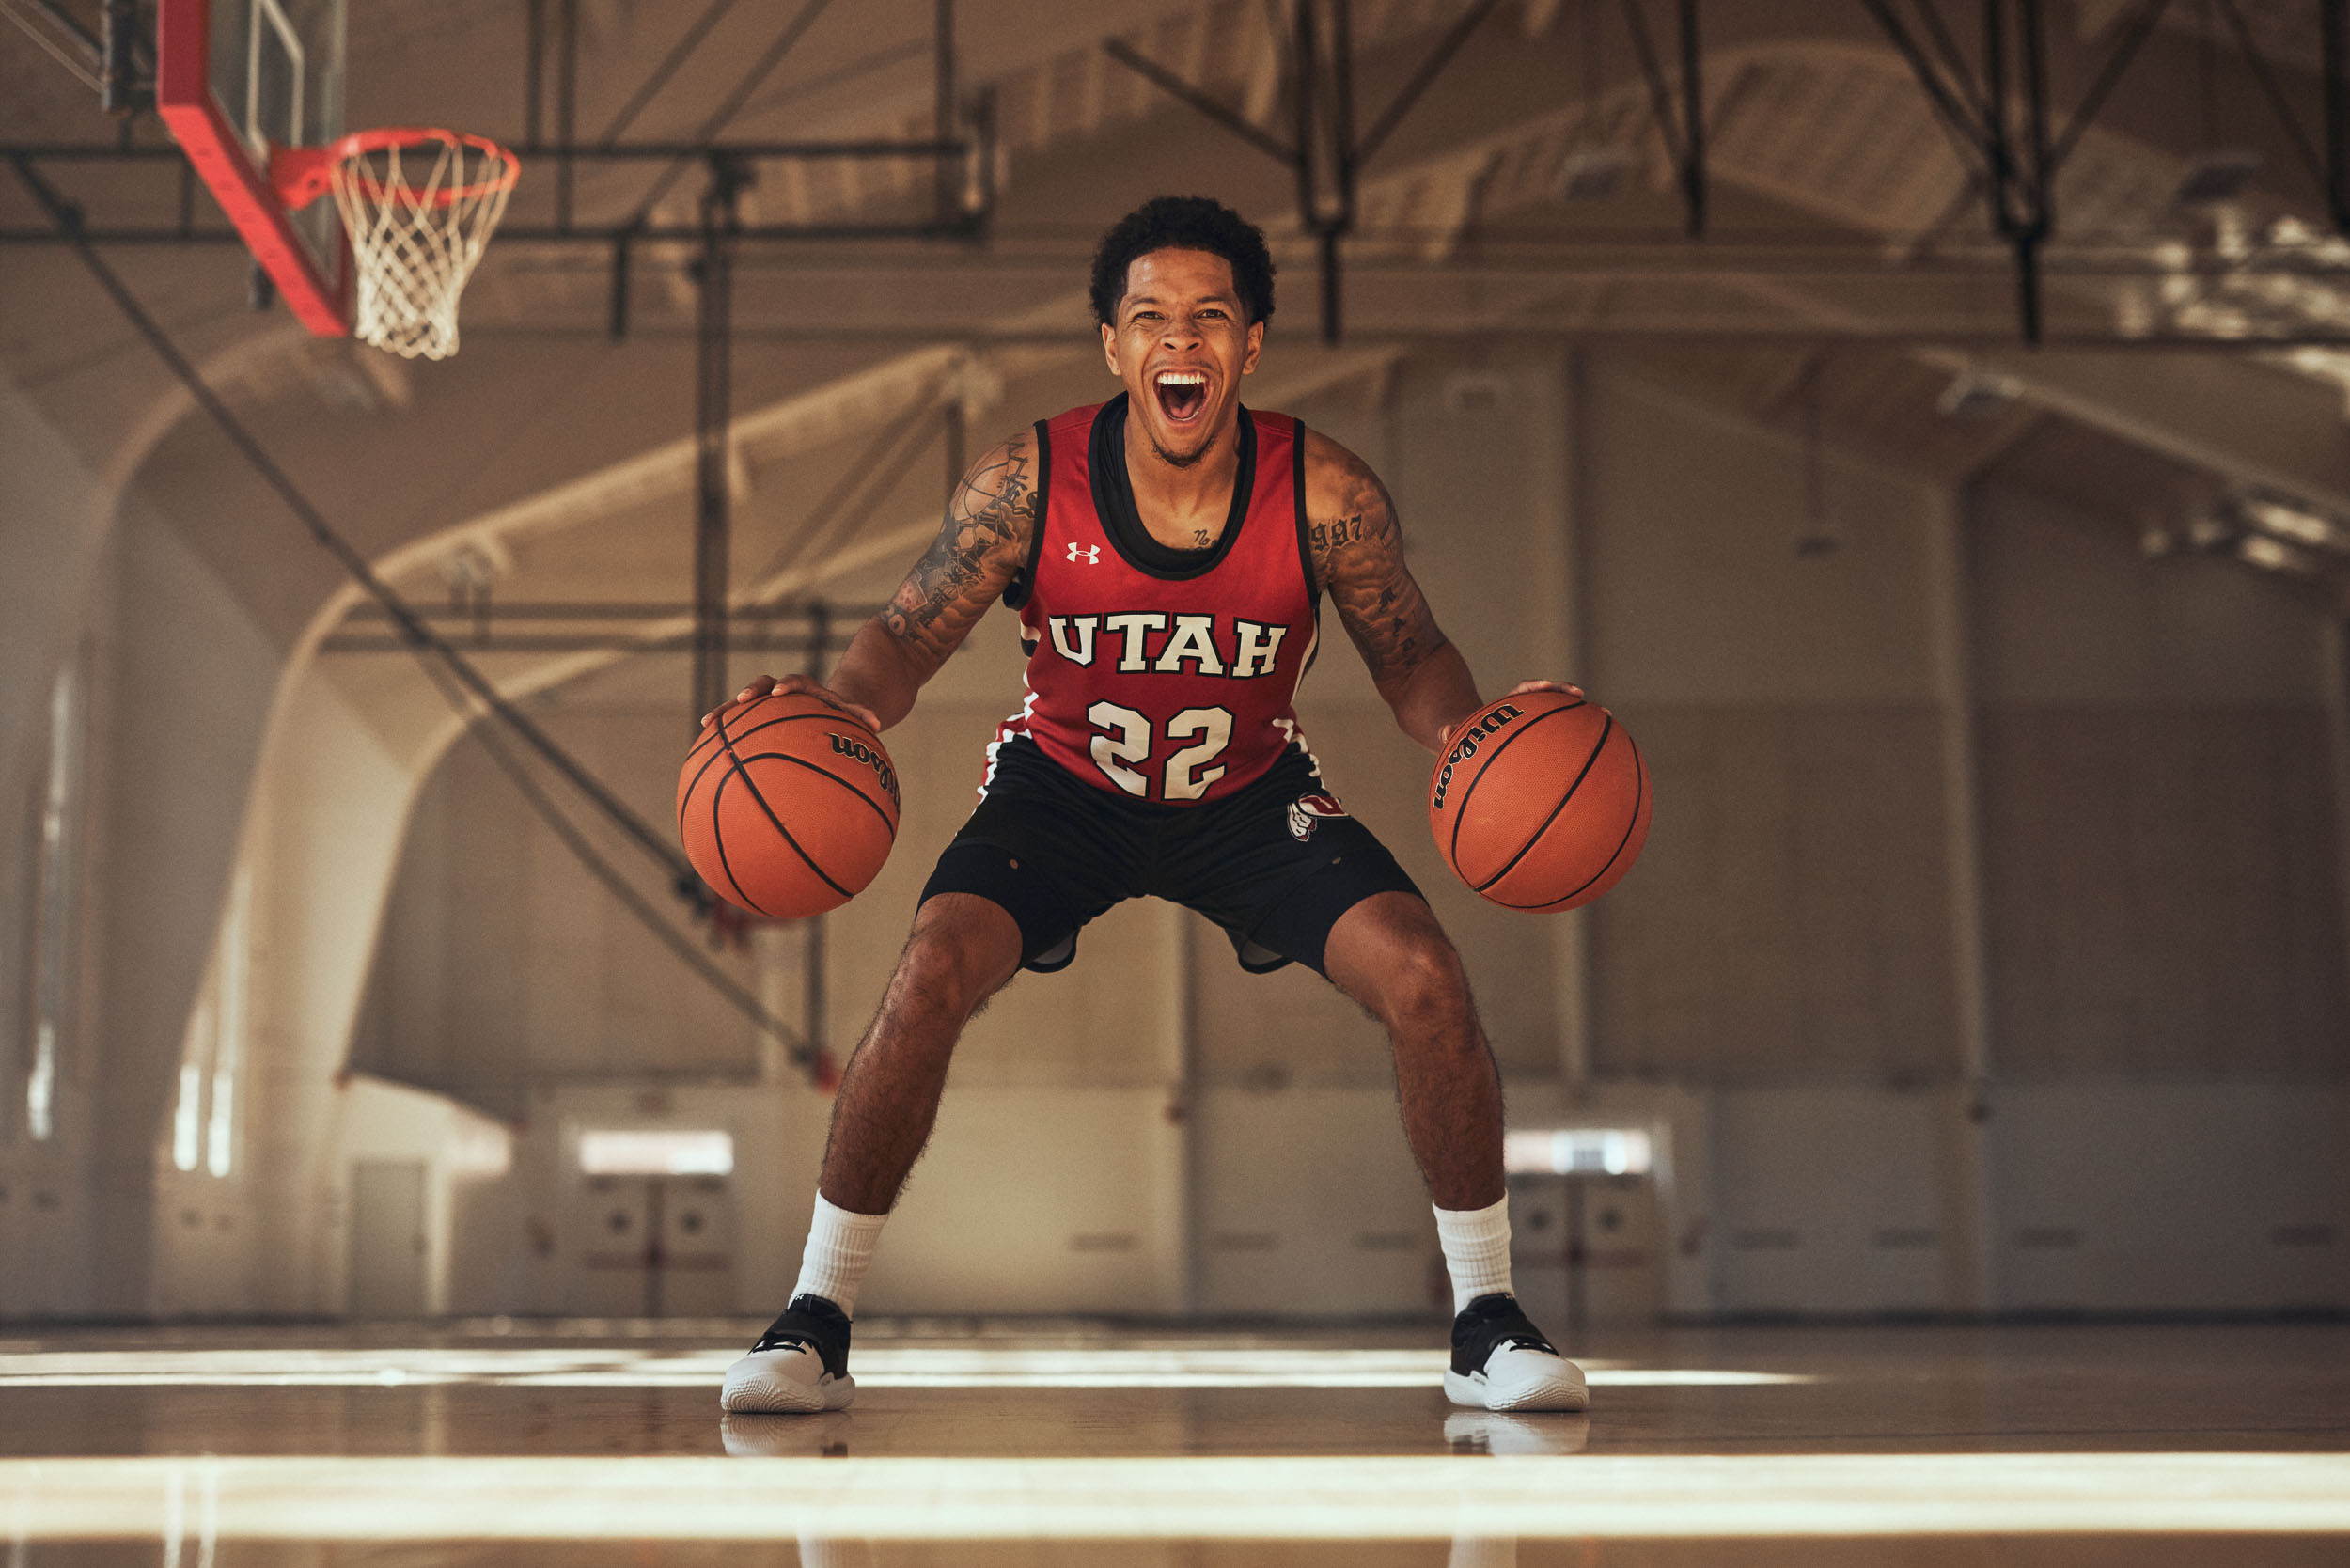 COMMERCIAL SPORTS ADVERTISING PHOTOGRAPHER SPECIALIZING IN ATHLETE PORTRAIT PHOTOGRAPHY